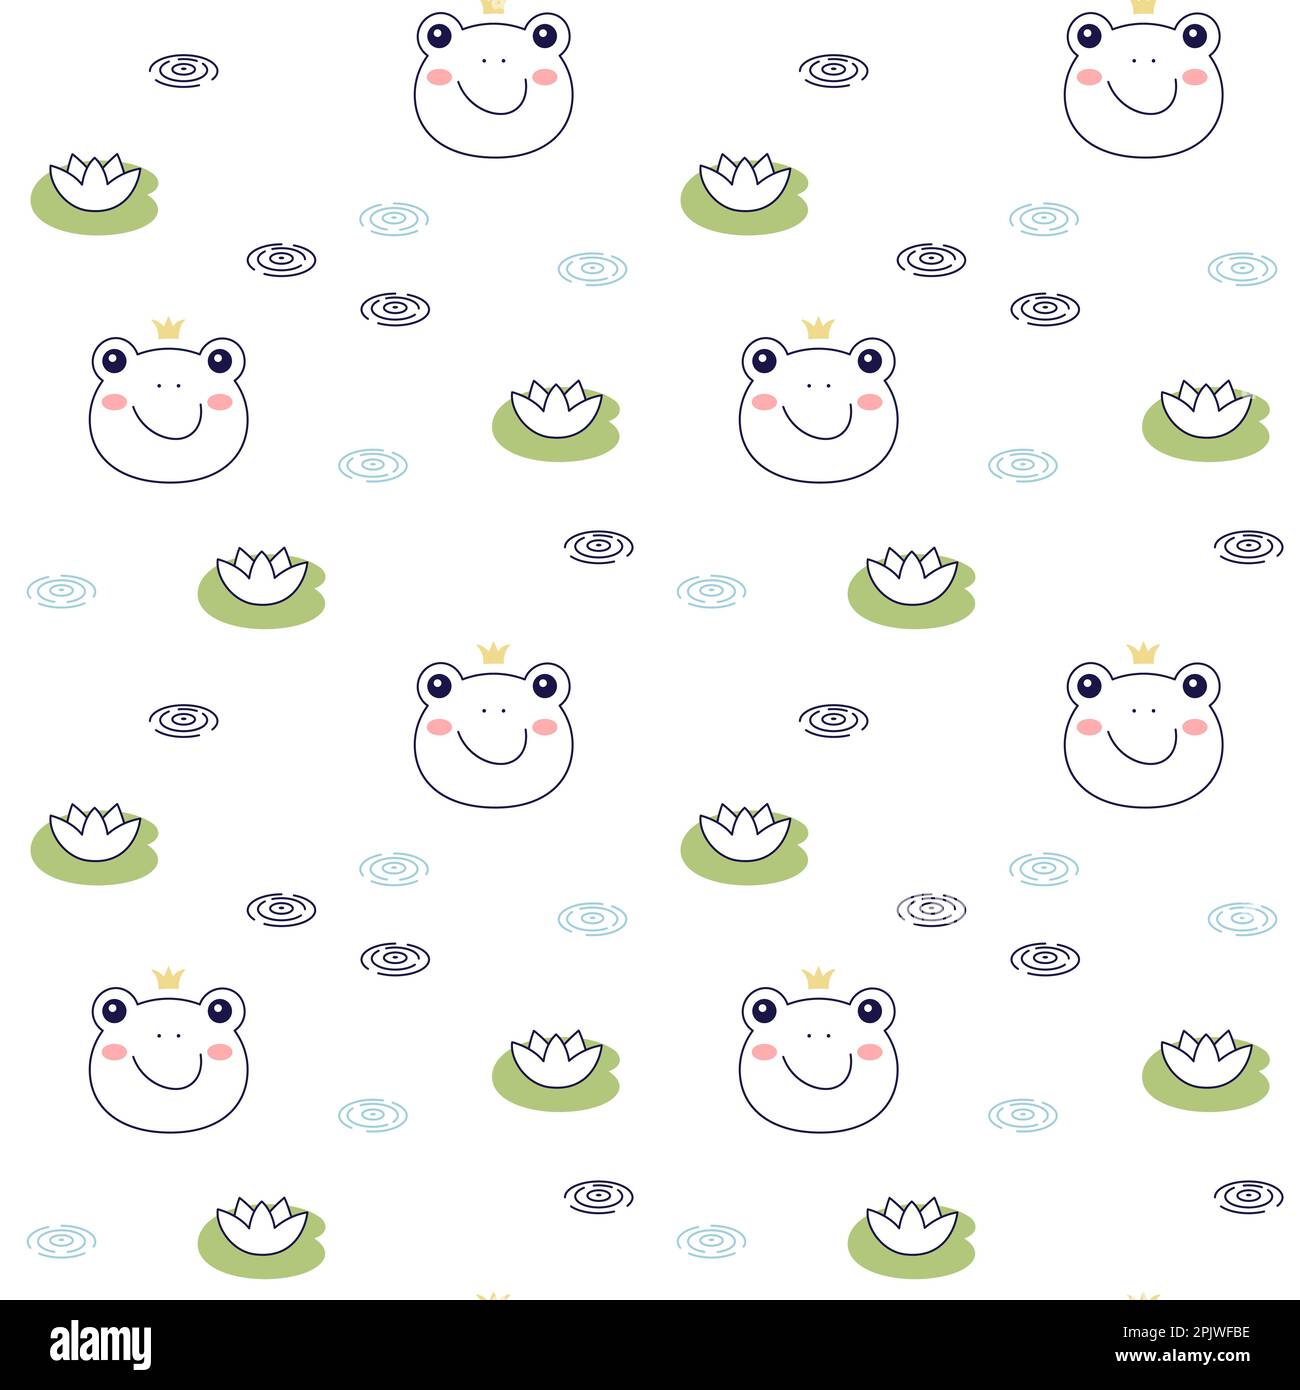 Frog princess doodle style. Hand drawn seamless pattern with cute cartoon frog with crown. Vector illustration Stock Vector